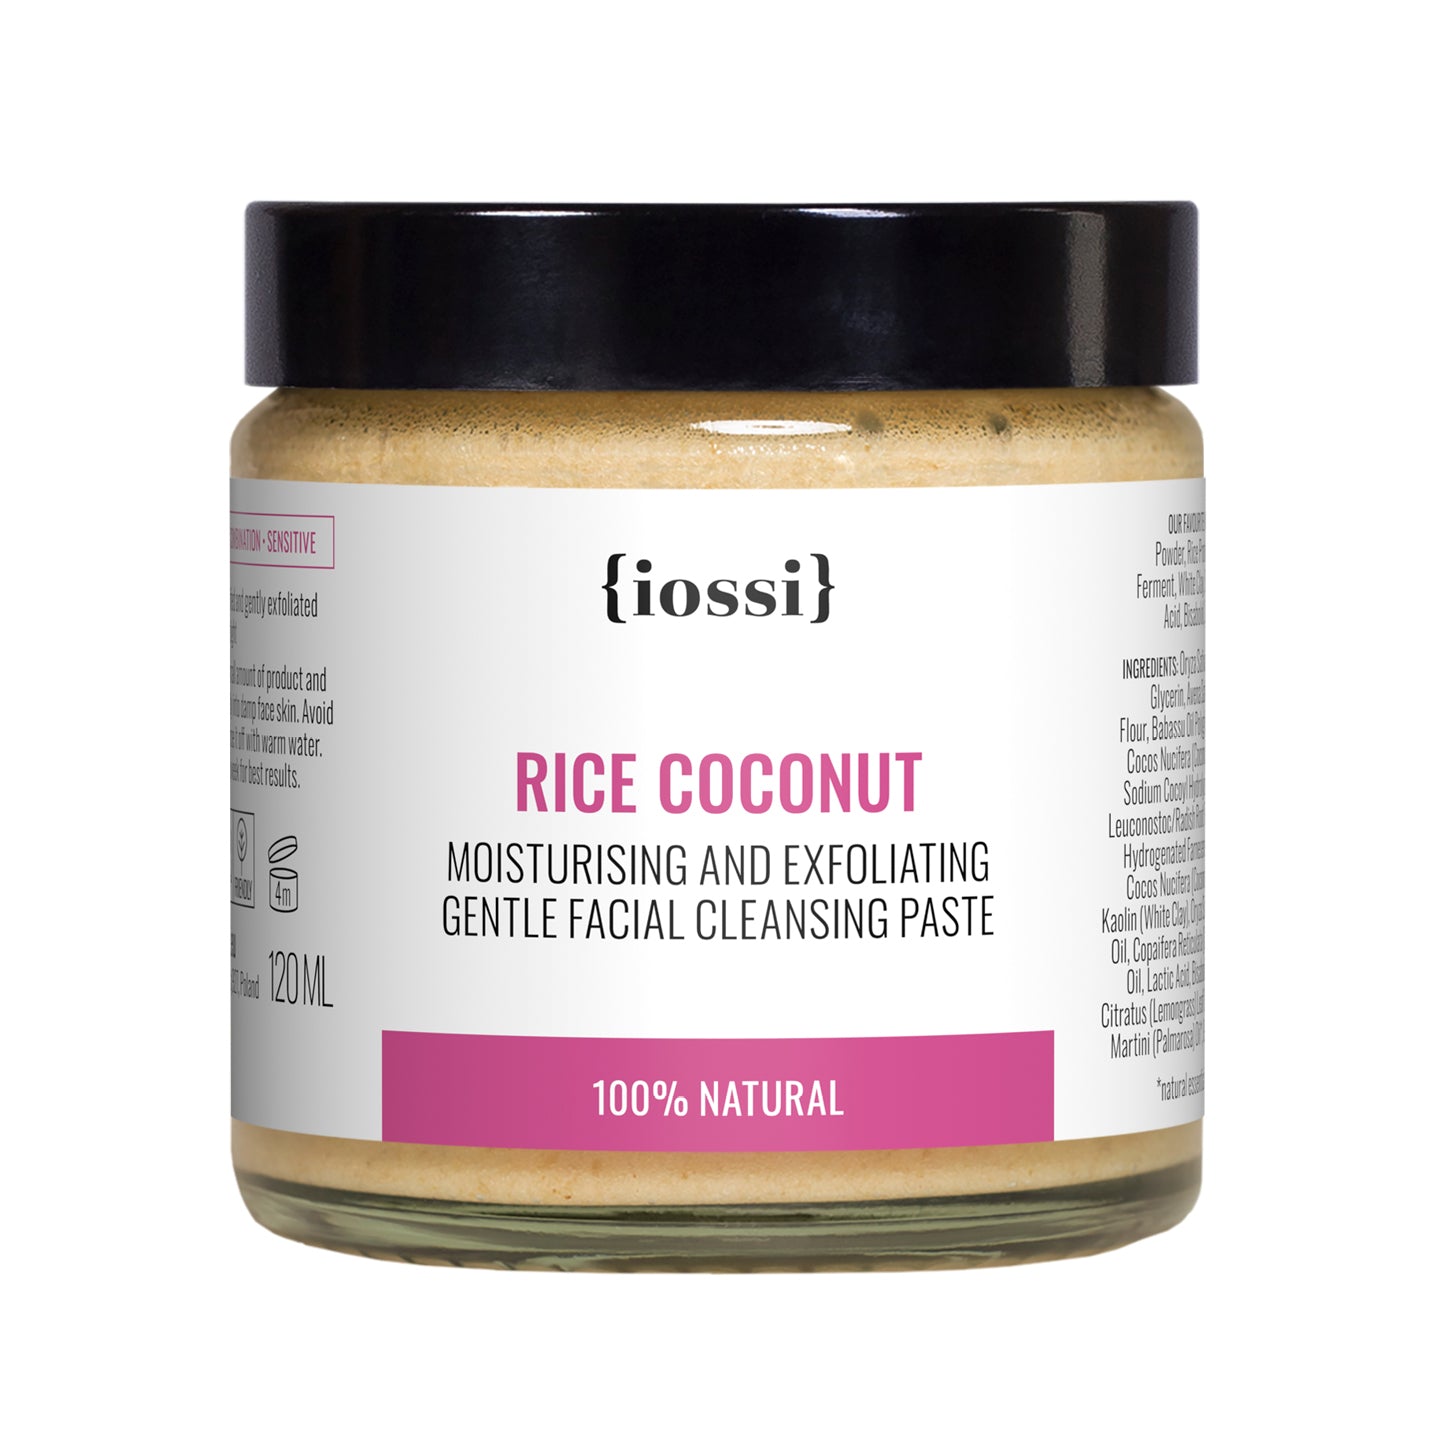 Rice Coconut. Moisturising and Exfoliating Facial Cleansing Paste